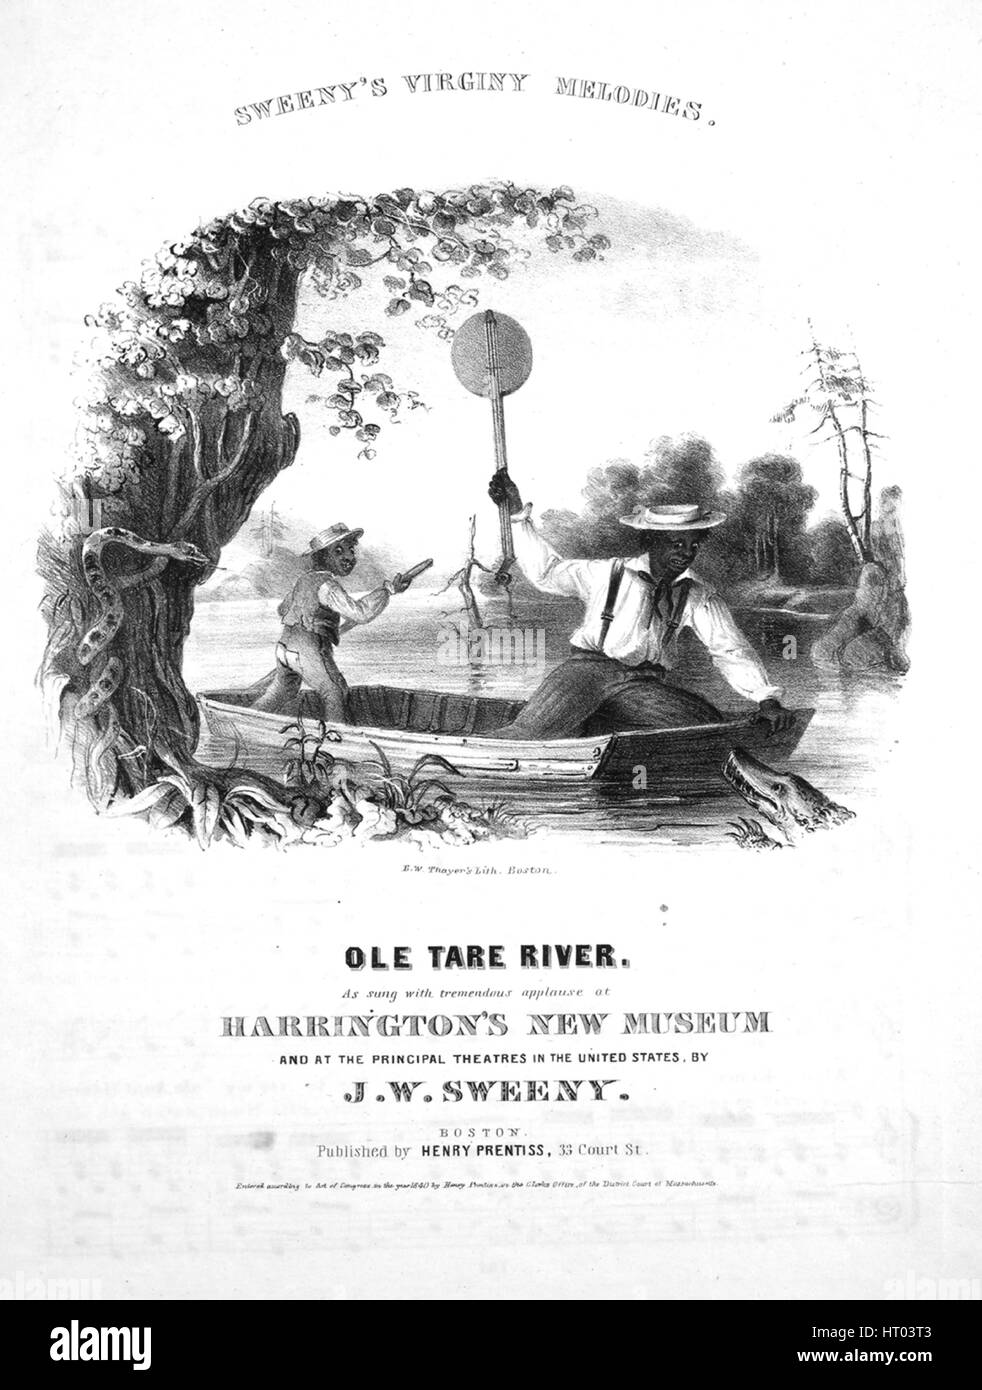 Sheet music cover image of the song 'Sweeny's Virginy Melodies Ole Tare River', with original authorship notes reading 'na', United States, 1840. The publisher is listed as 'Henry Prentiss, 33 Court St.', the form of composition is 'strophic', the instrumentation is 'piano and voice', the first line reads 'Way down in North Carolina On de banks of Ole Tare River', and the illustration artist is listed as 'B.W. Thayer's Lith. Boston'. Stock Photo